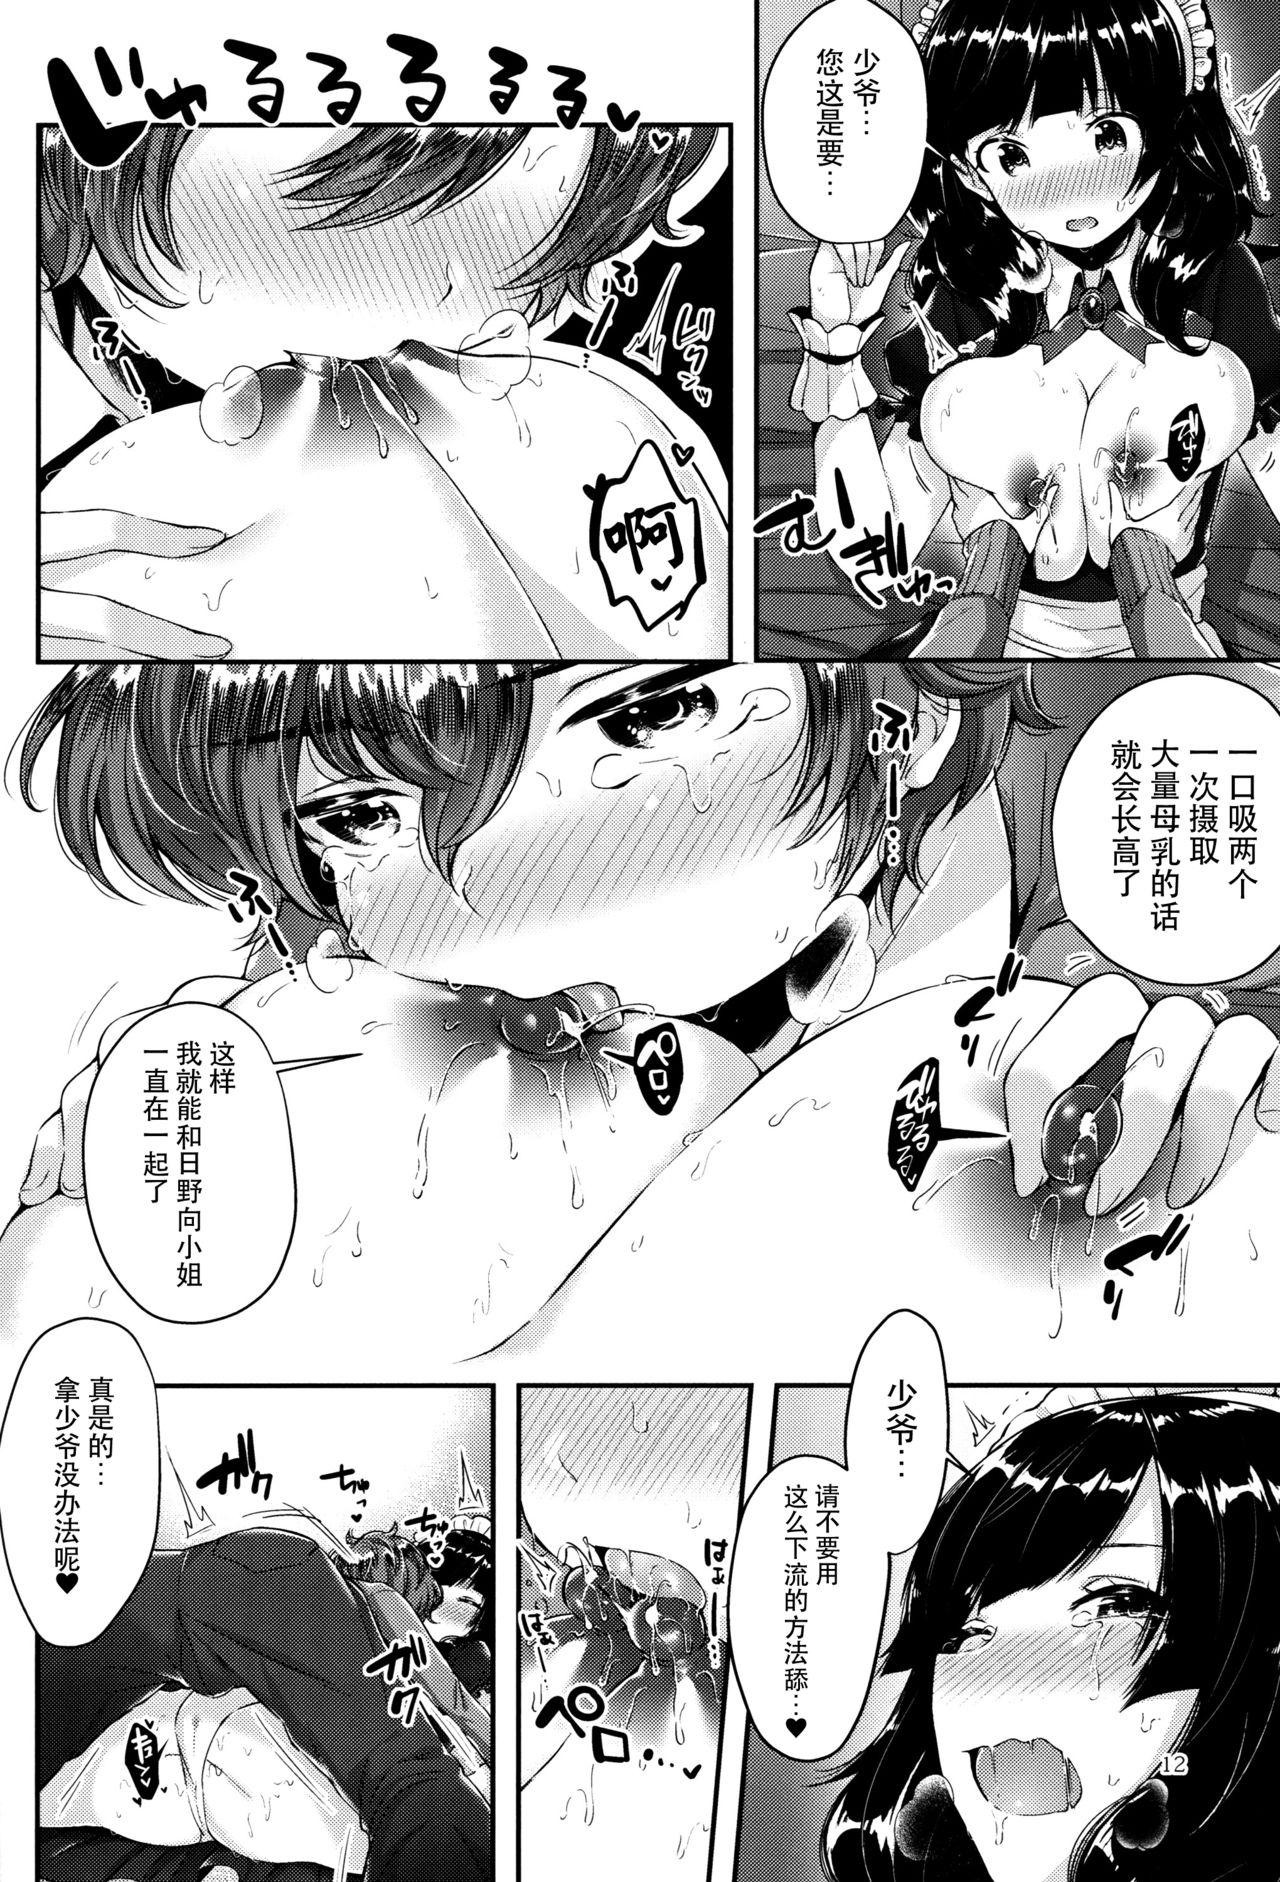 From Oppai no Jikan Special Locations - Page 12